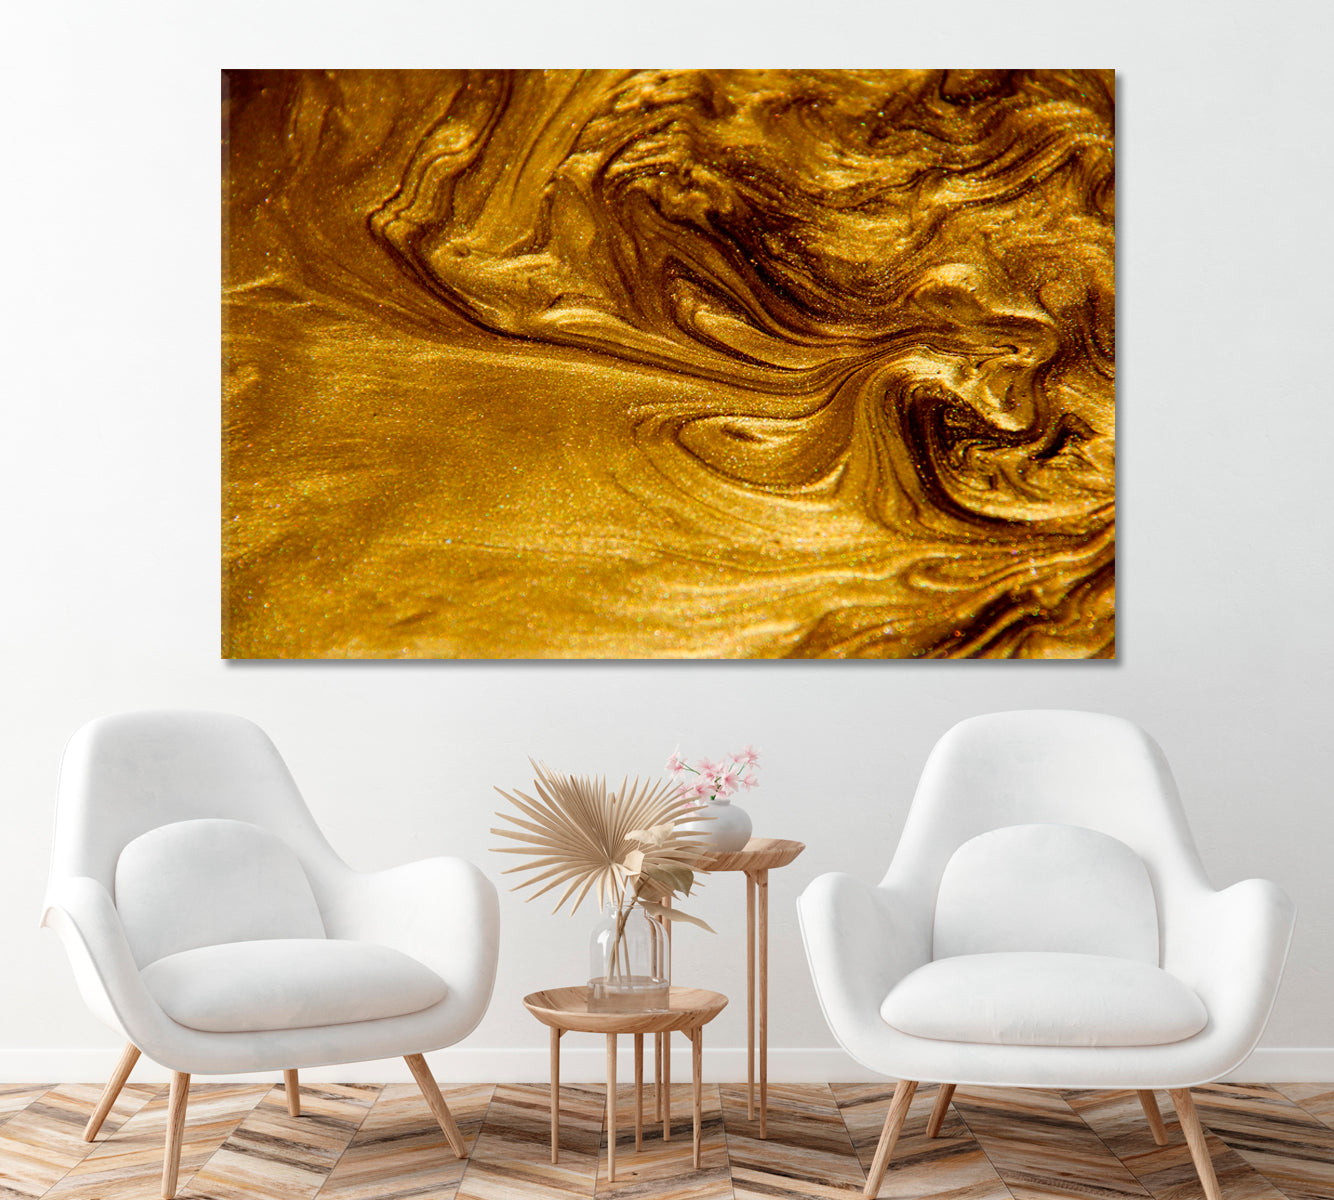 Abstract Gold Waves Canvas Print ArtLexy 1 Panel 24"x16" inches 